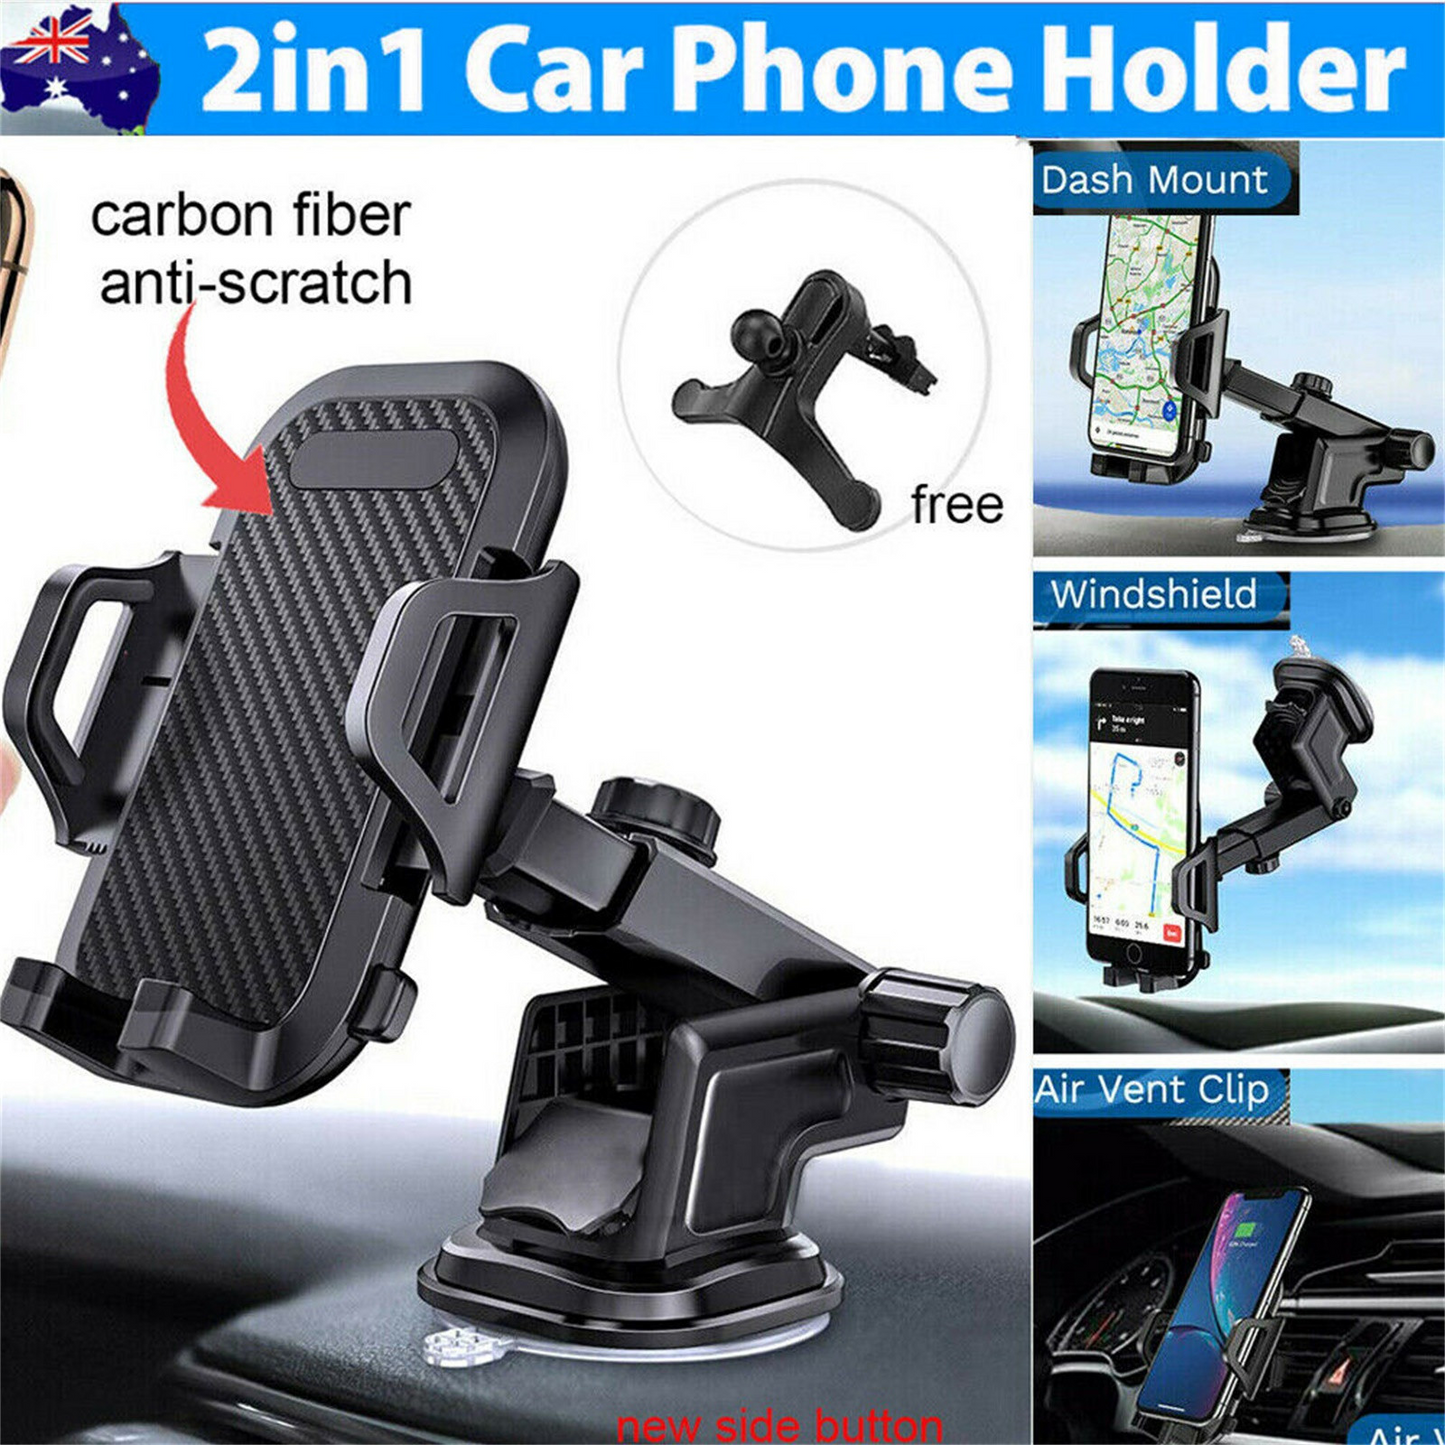 Car Phone Mount with Dashboard+Air Vent Cell Phone Holder 2 in 1